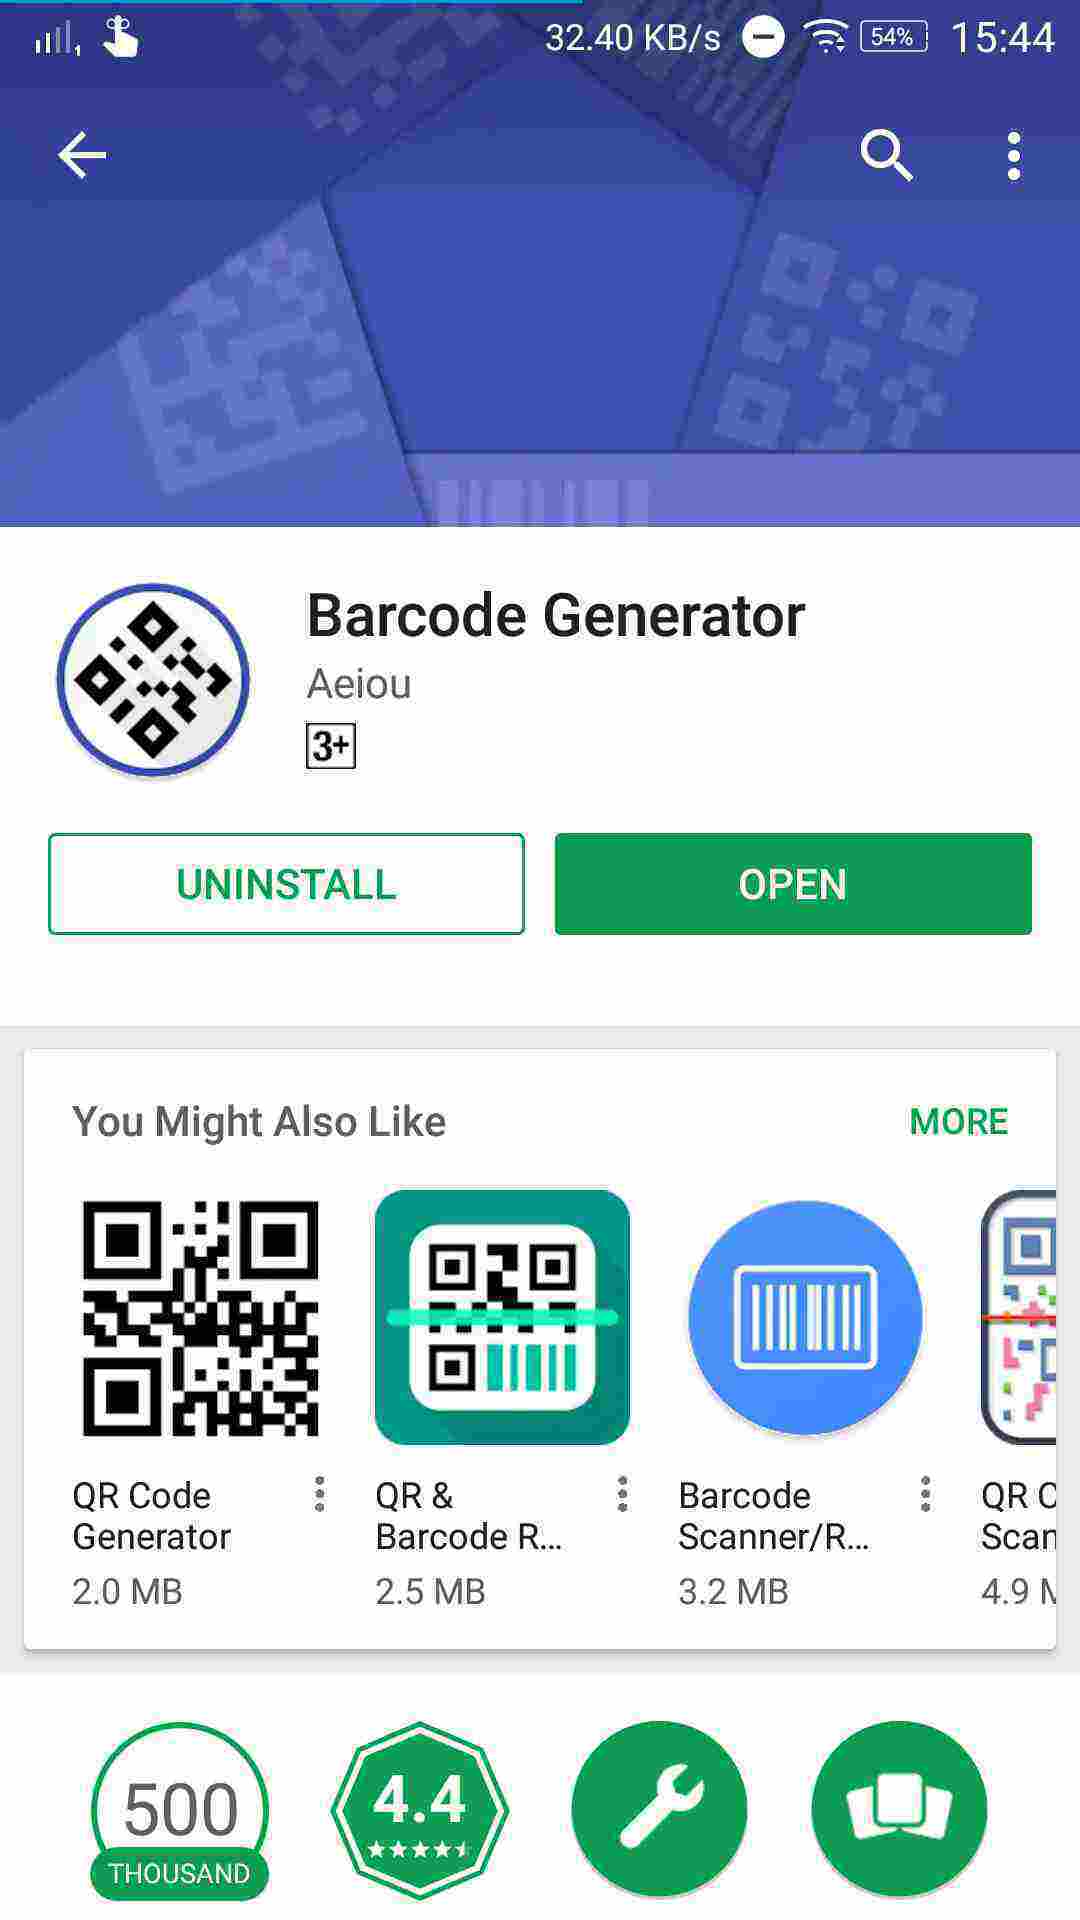 Generating QR Codes on Android